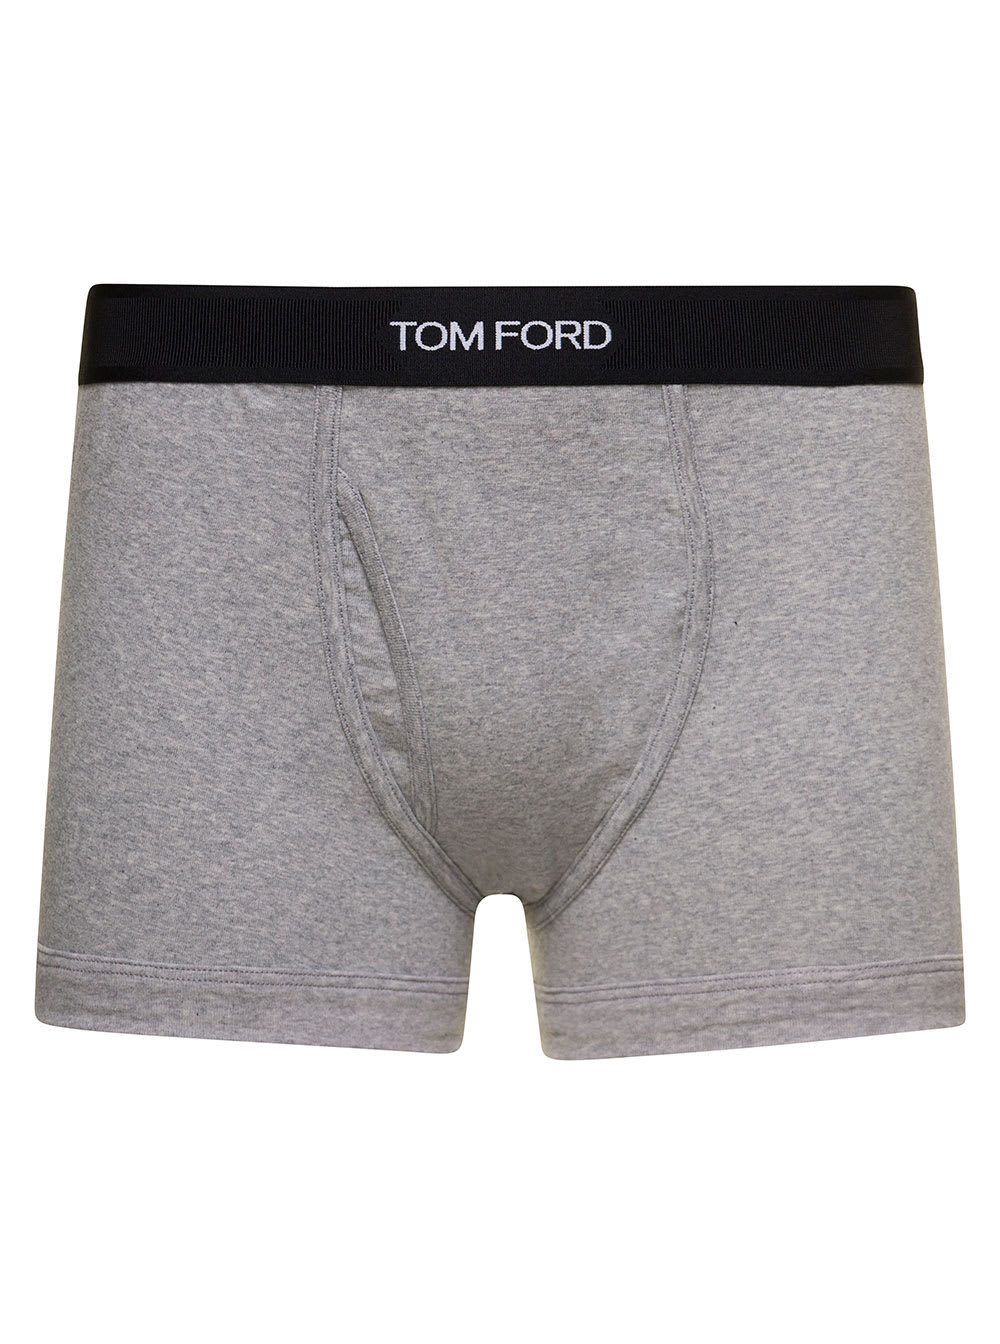 TOM FORD GREY BOXER BRIEF WITH ELASTICATED LOGGED WAISTBAND IN COTTON STRETCH MAN